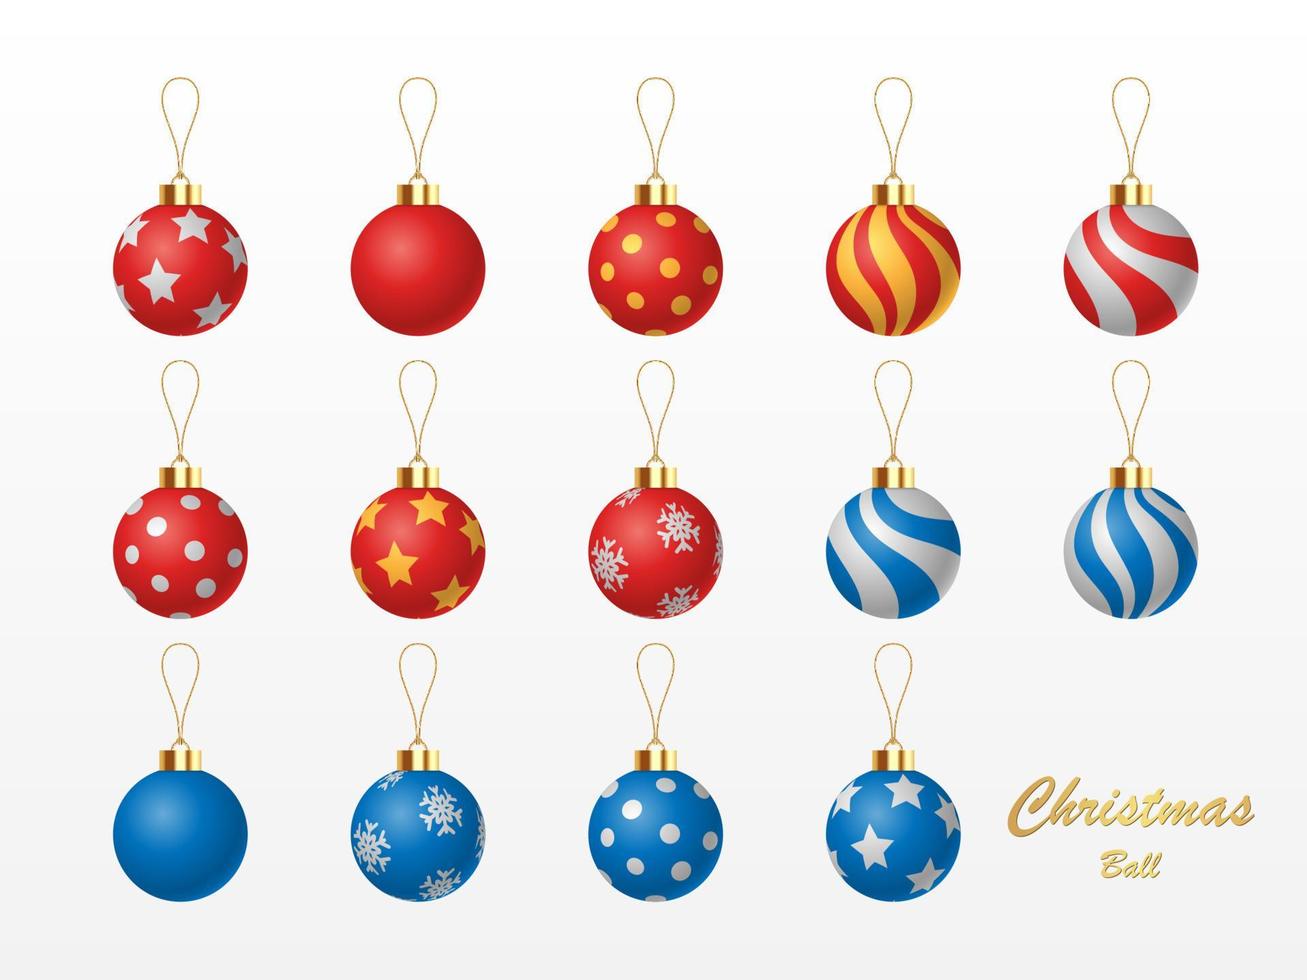 Christmas ball isolated on white background, vector illustration